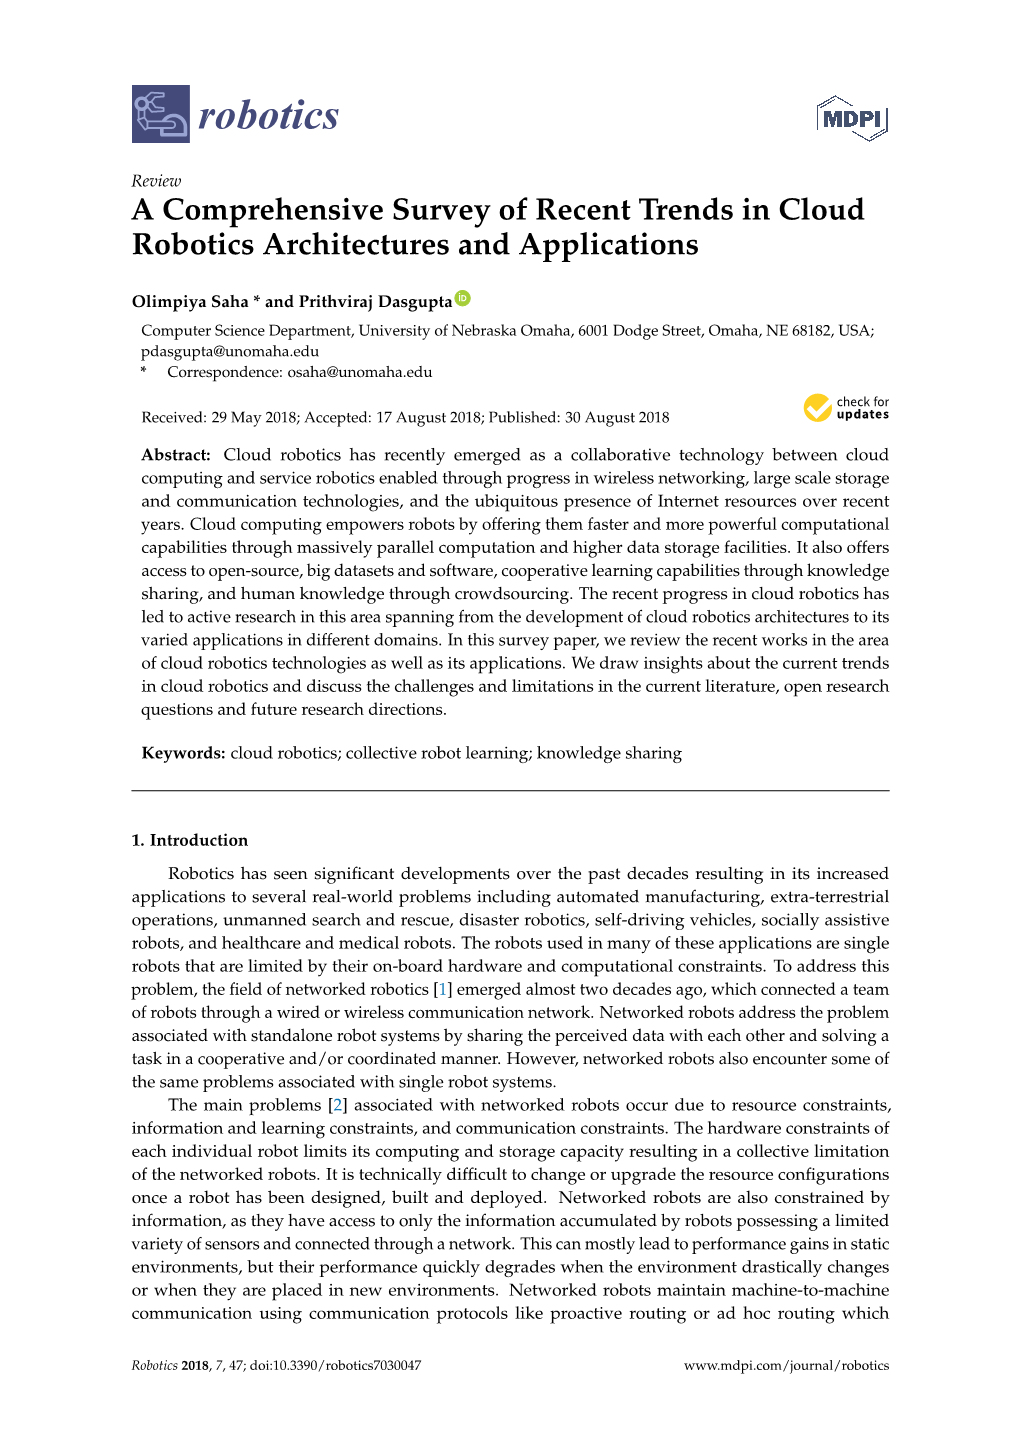 A Comprehensive Survey of Recent Trends in Cloud Robotics Architectures and Applications